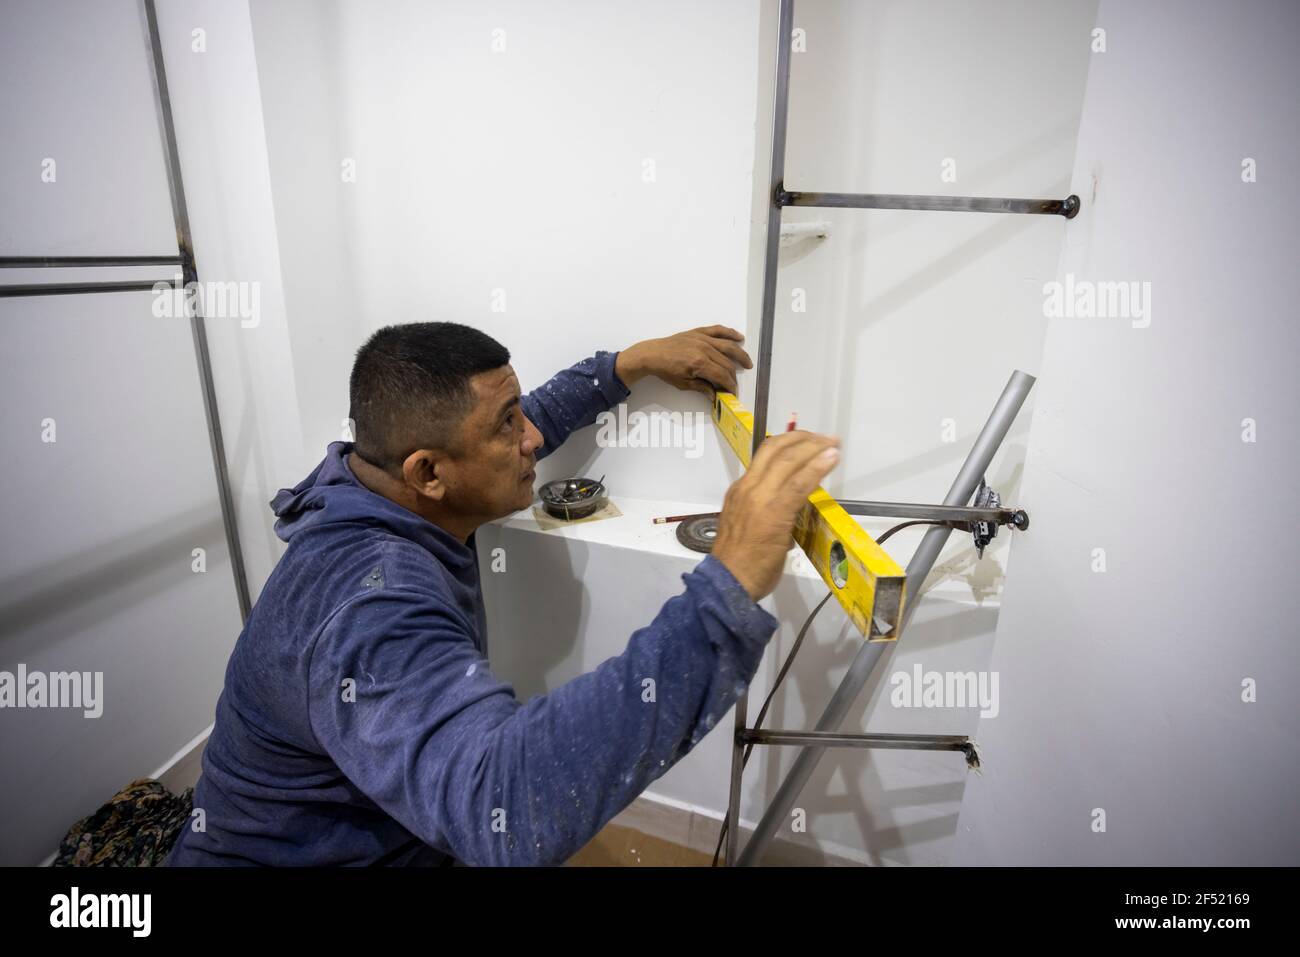 Colombian metalworker preparing the metal structure during work Stock Photo